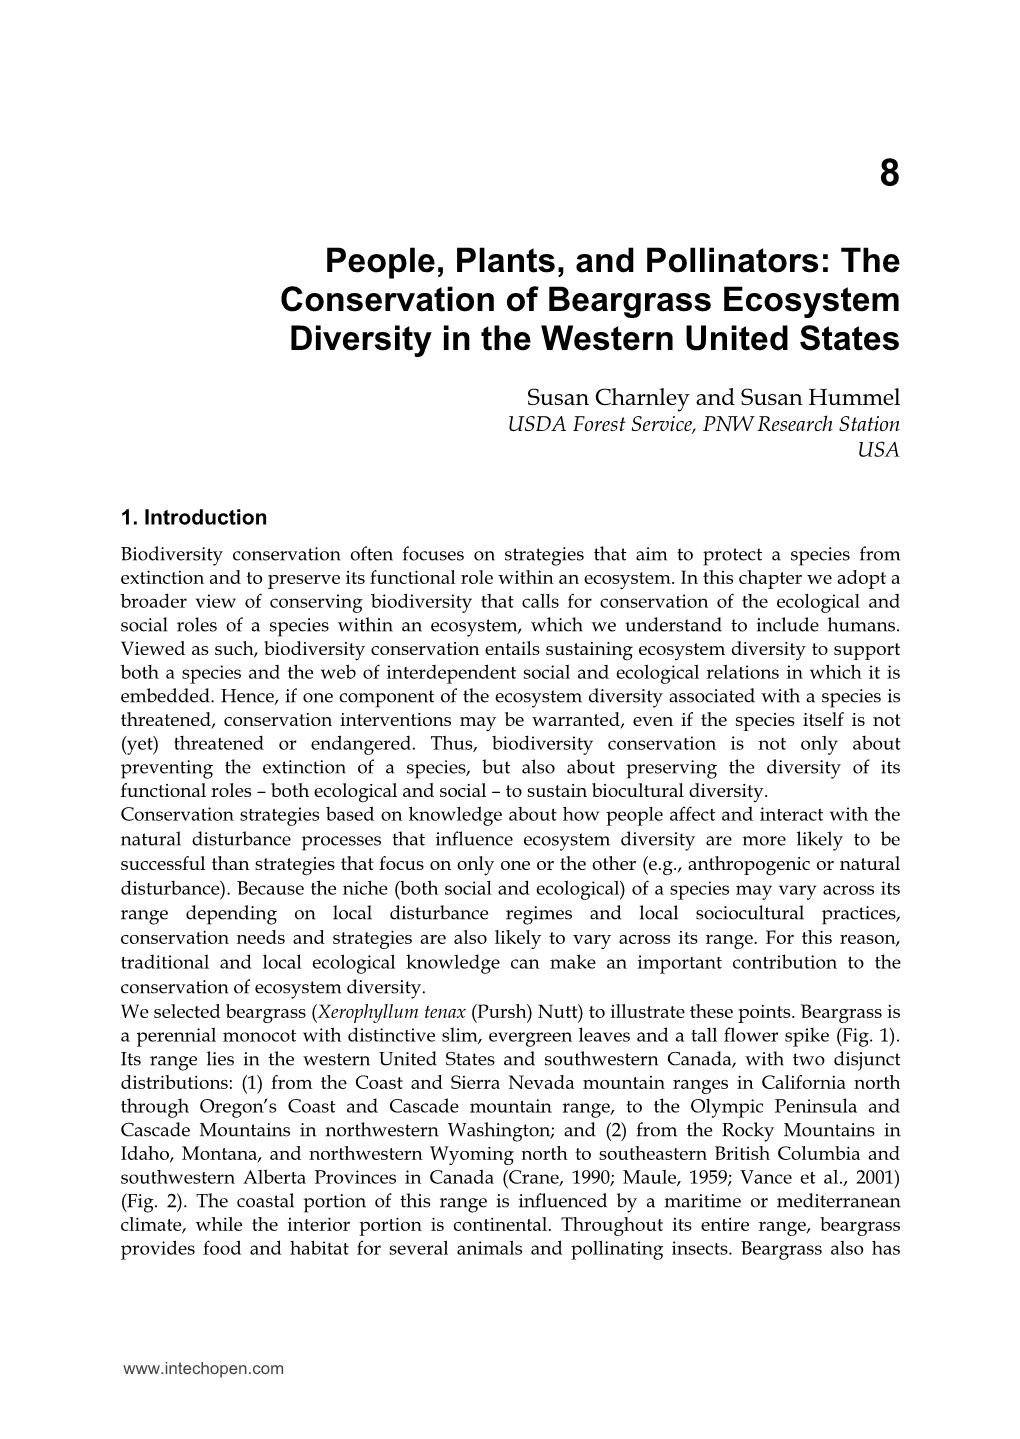 People, Plants, and Pollinators: the Conservation of Beargrass Ecosystem Diversity in the Western United States